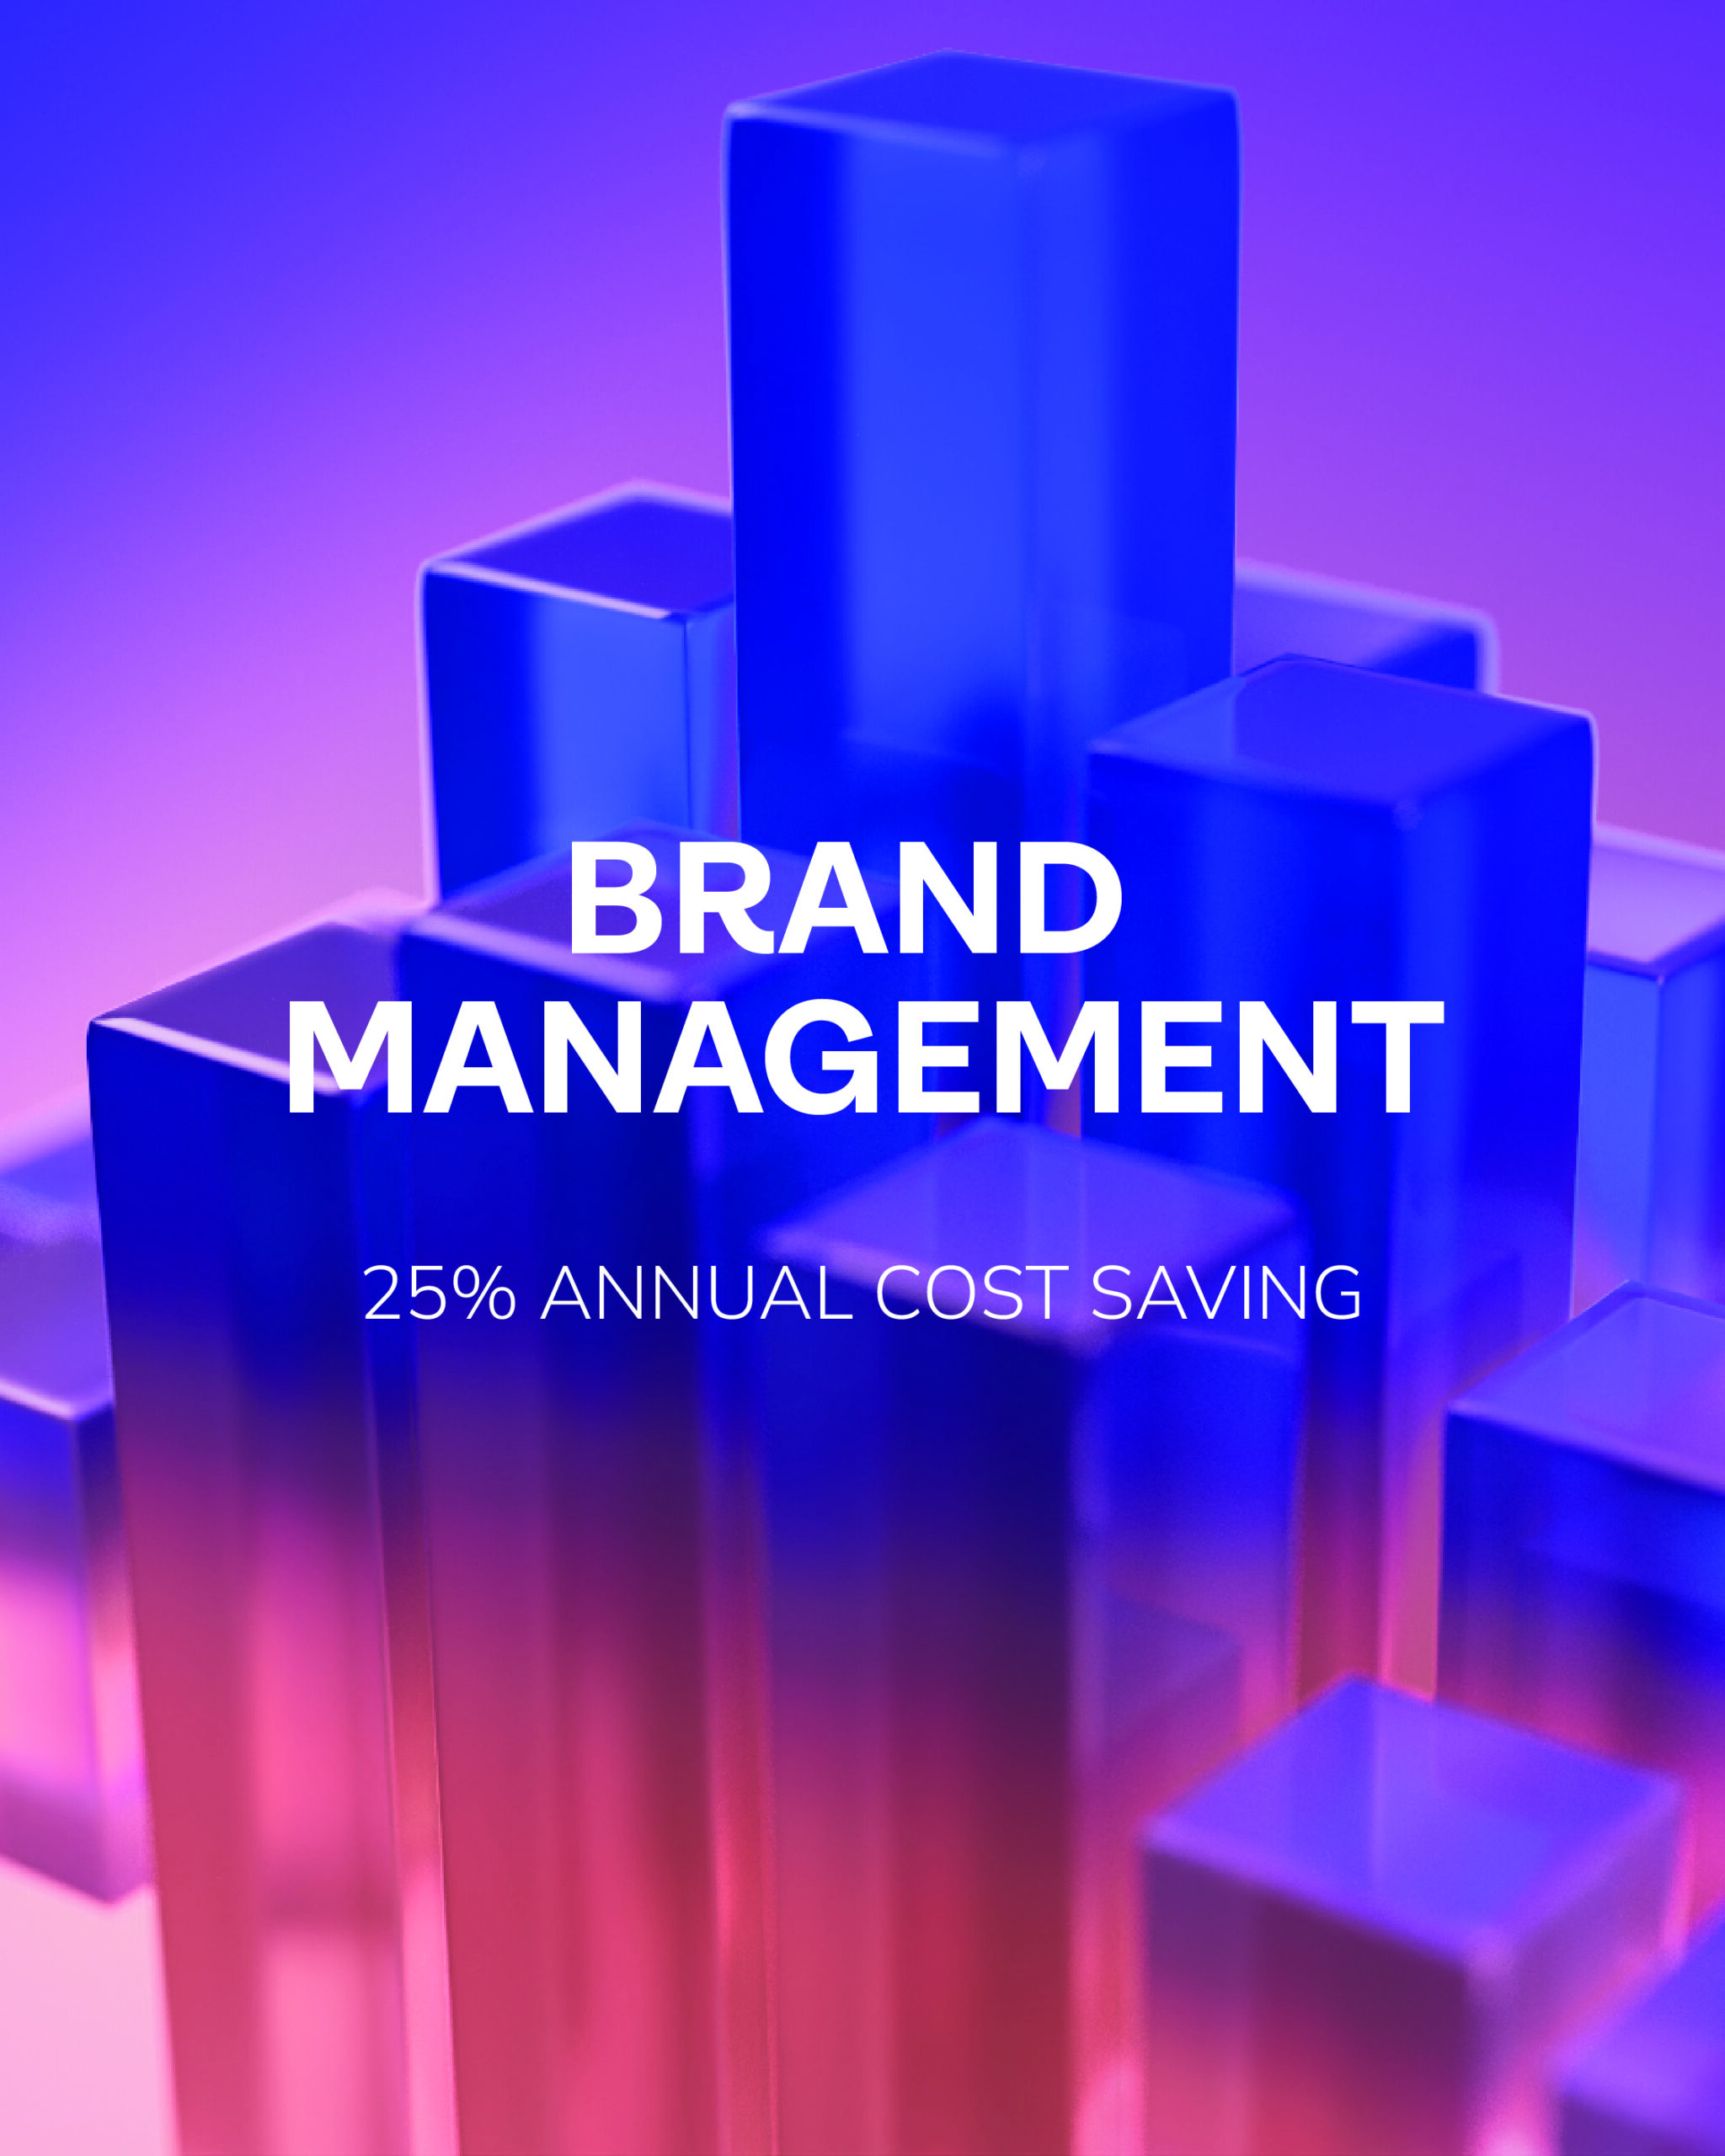 BRAND MANAGEMENT - 25% ANNUAL COST SAVING